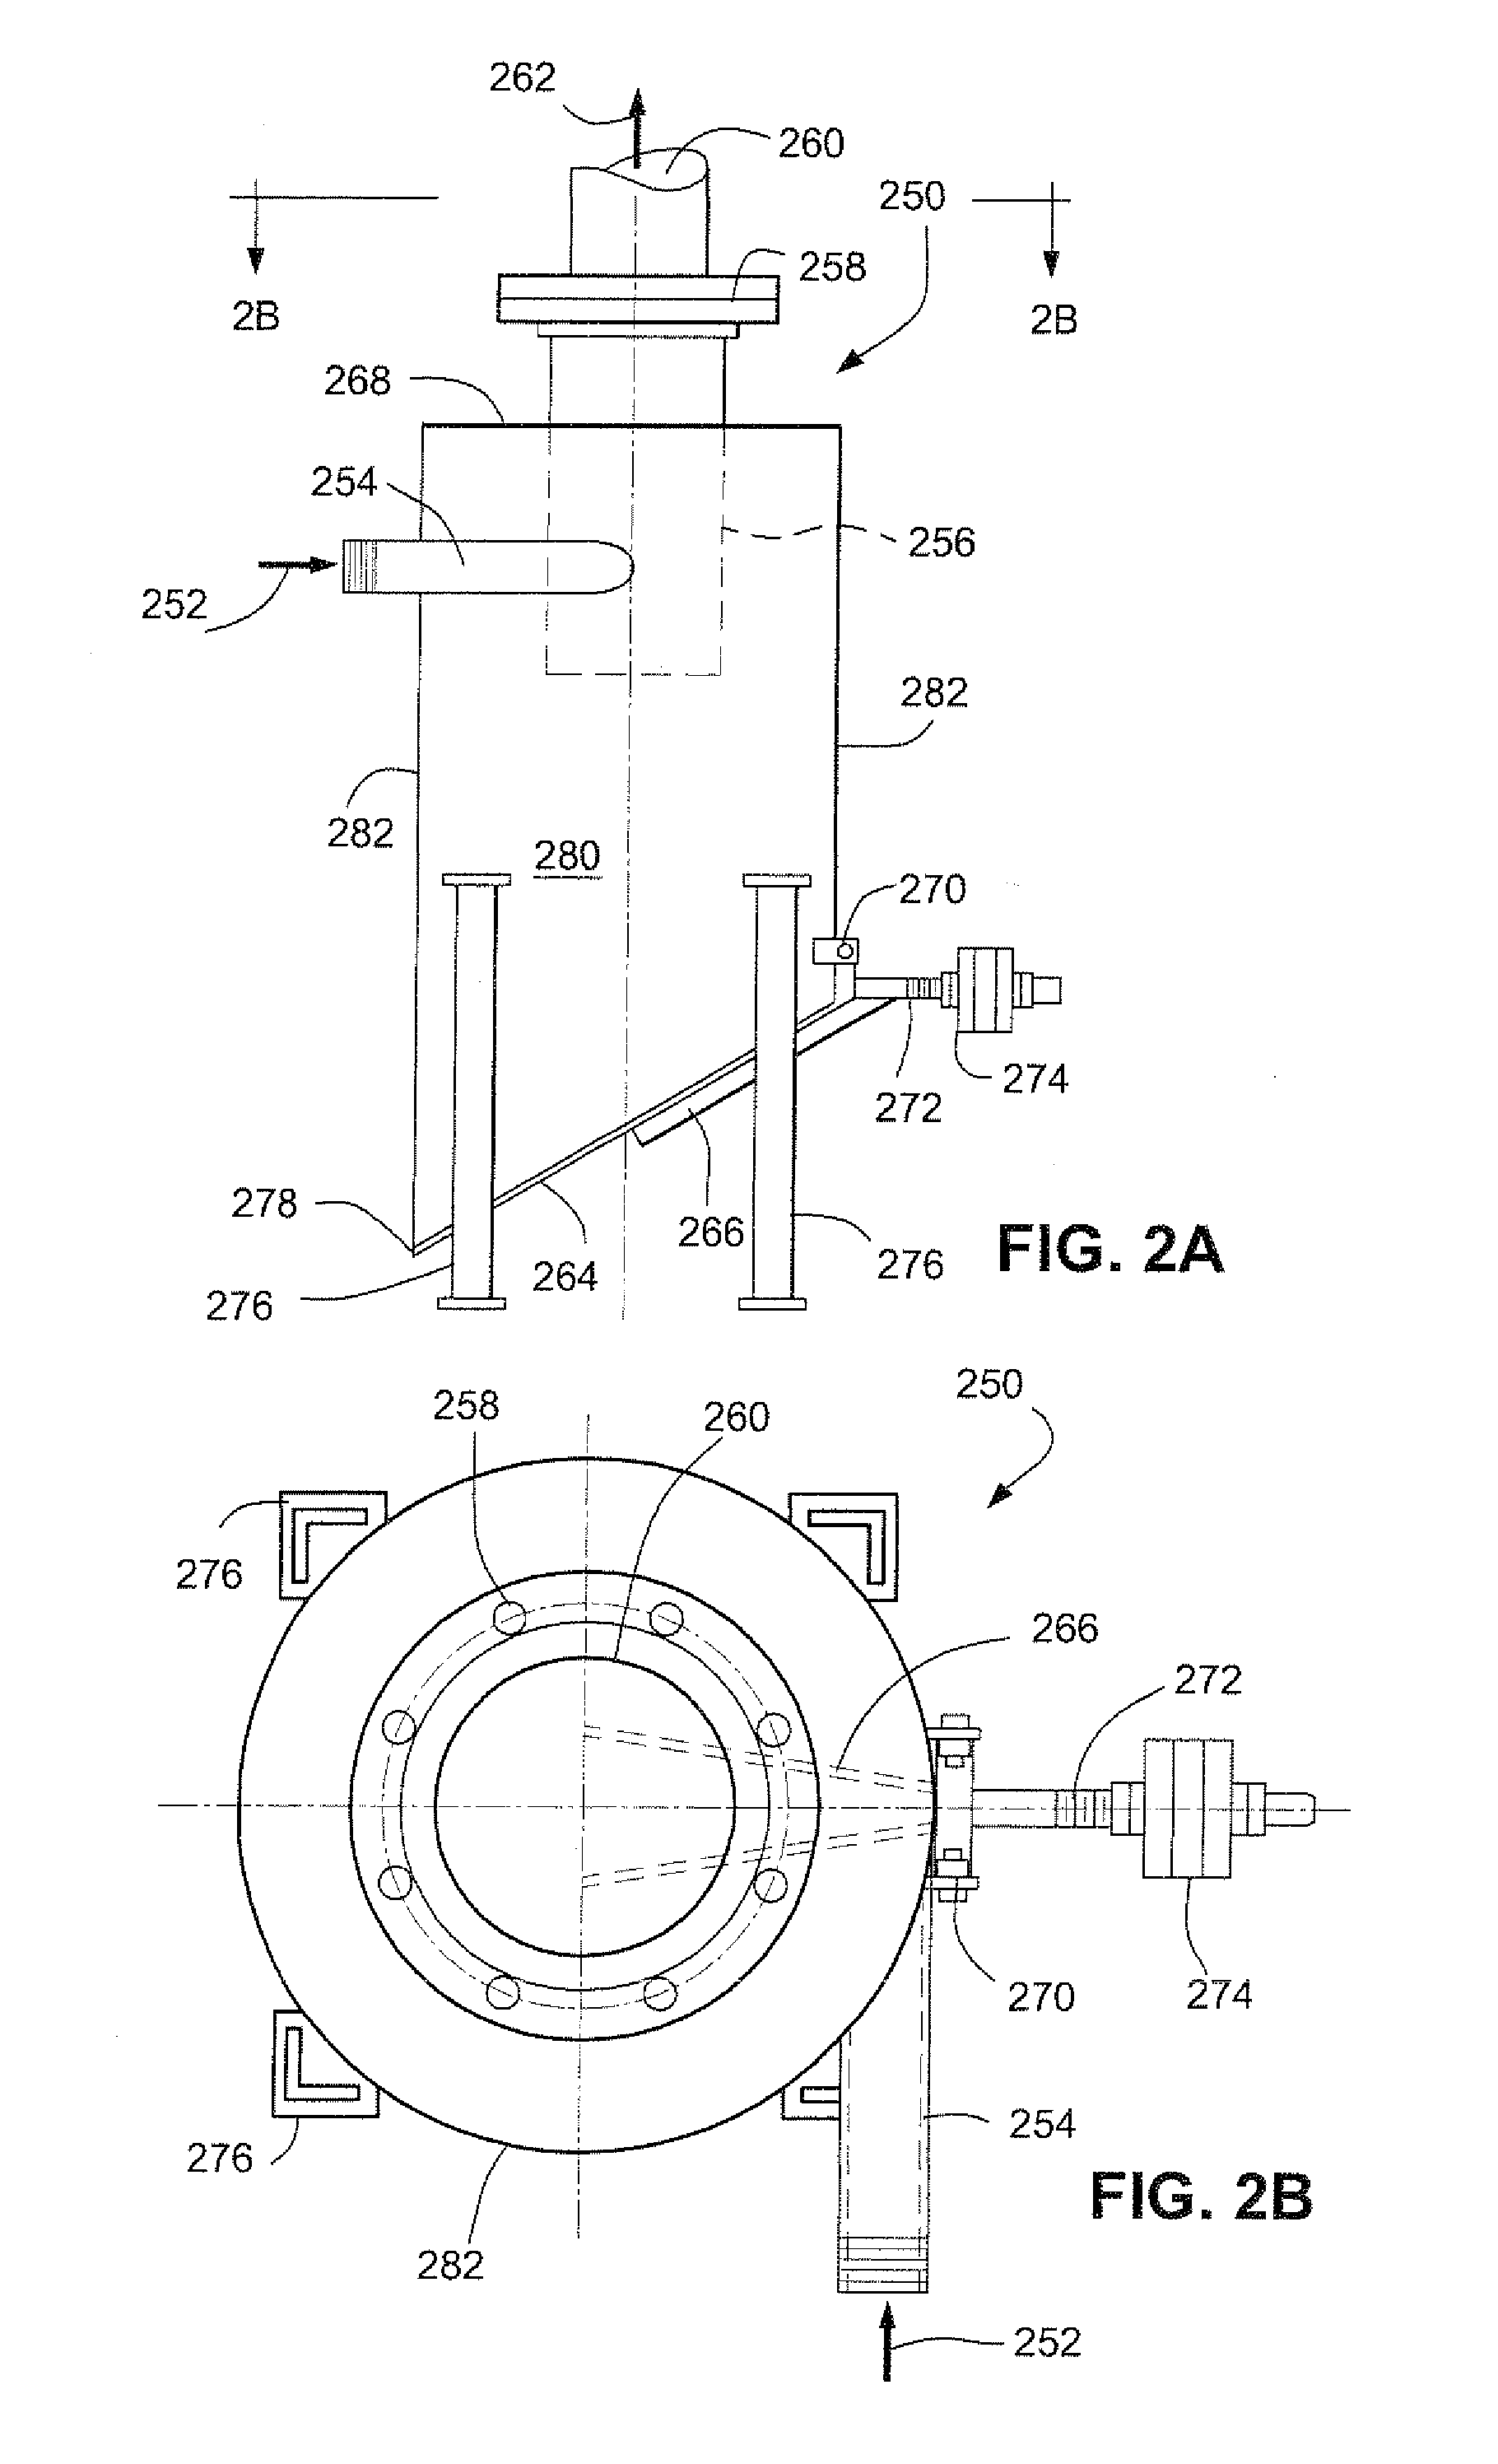 Degassing method and apparatus for separating gas from liquids and possibly solids